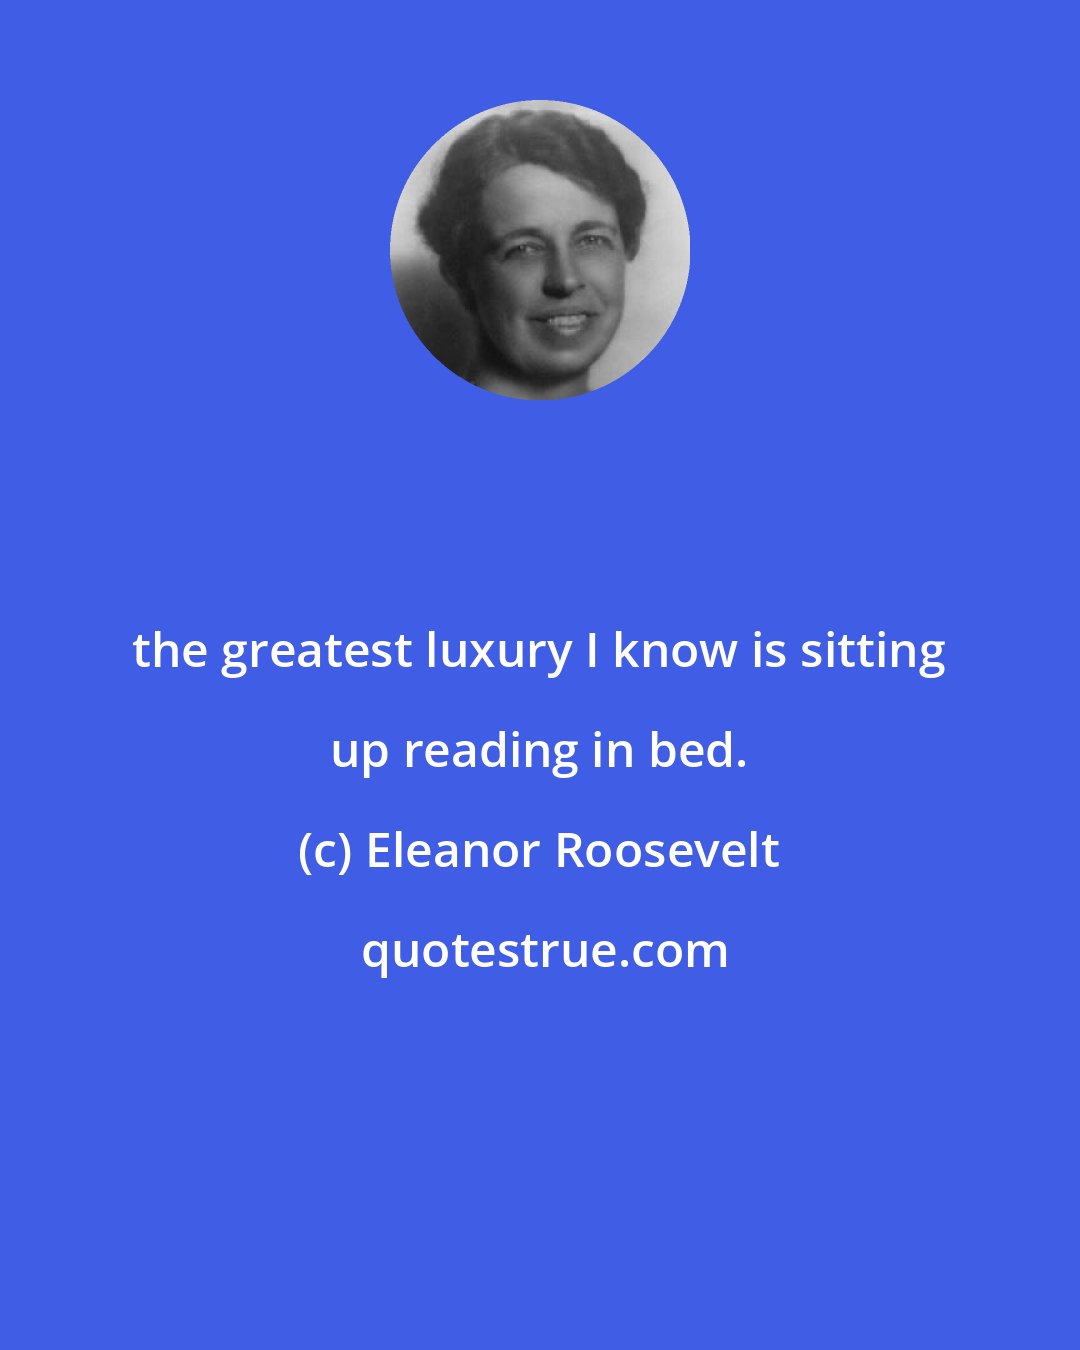 Eleanor Roosevelt: the greatest luxury I know is sitting up reading in bed.